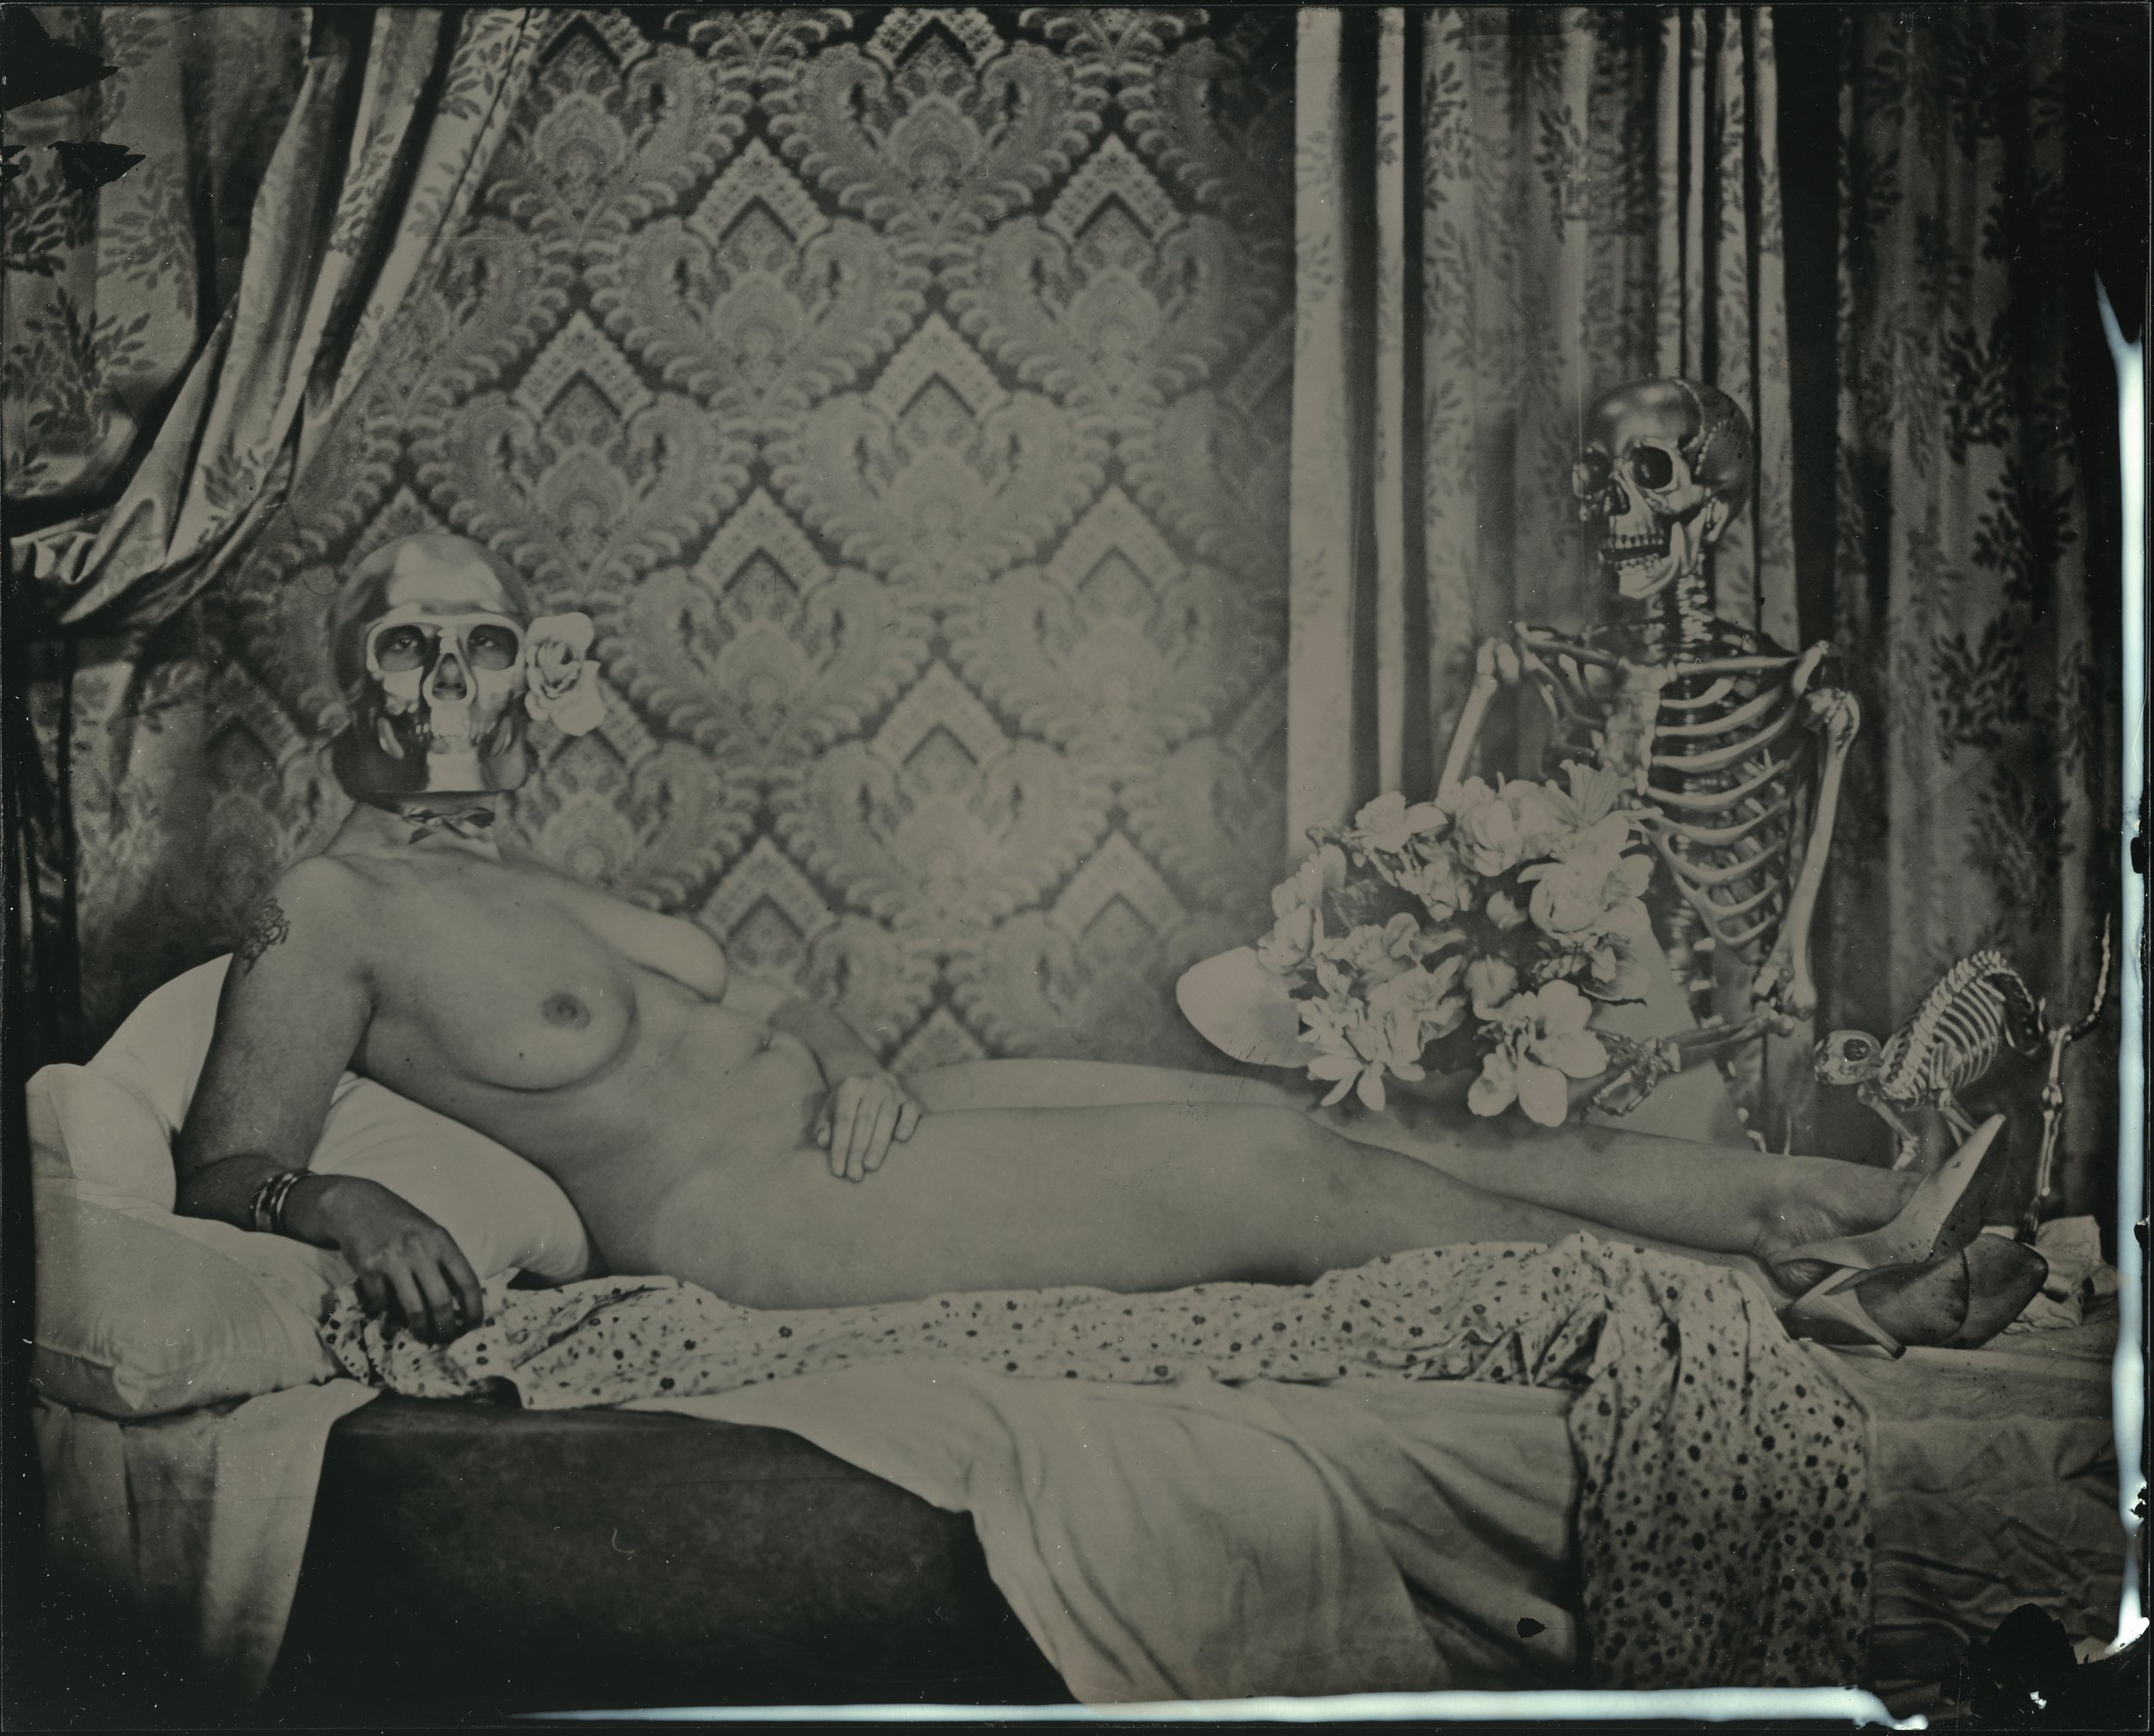   “Olympia Reincarnate”   2019  Wet Plate Collodion  8x10 